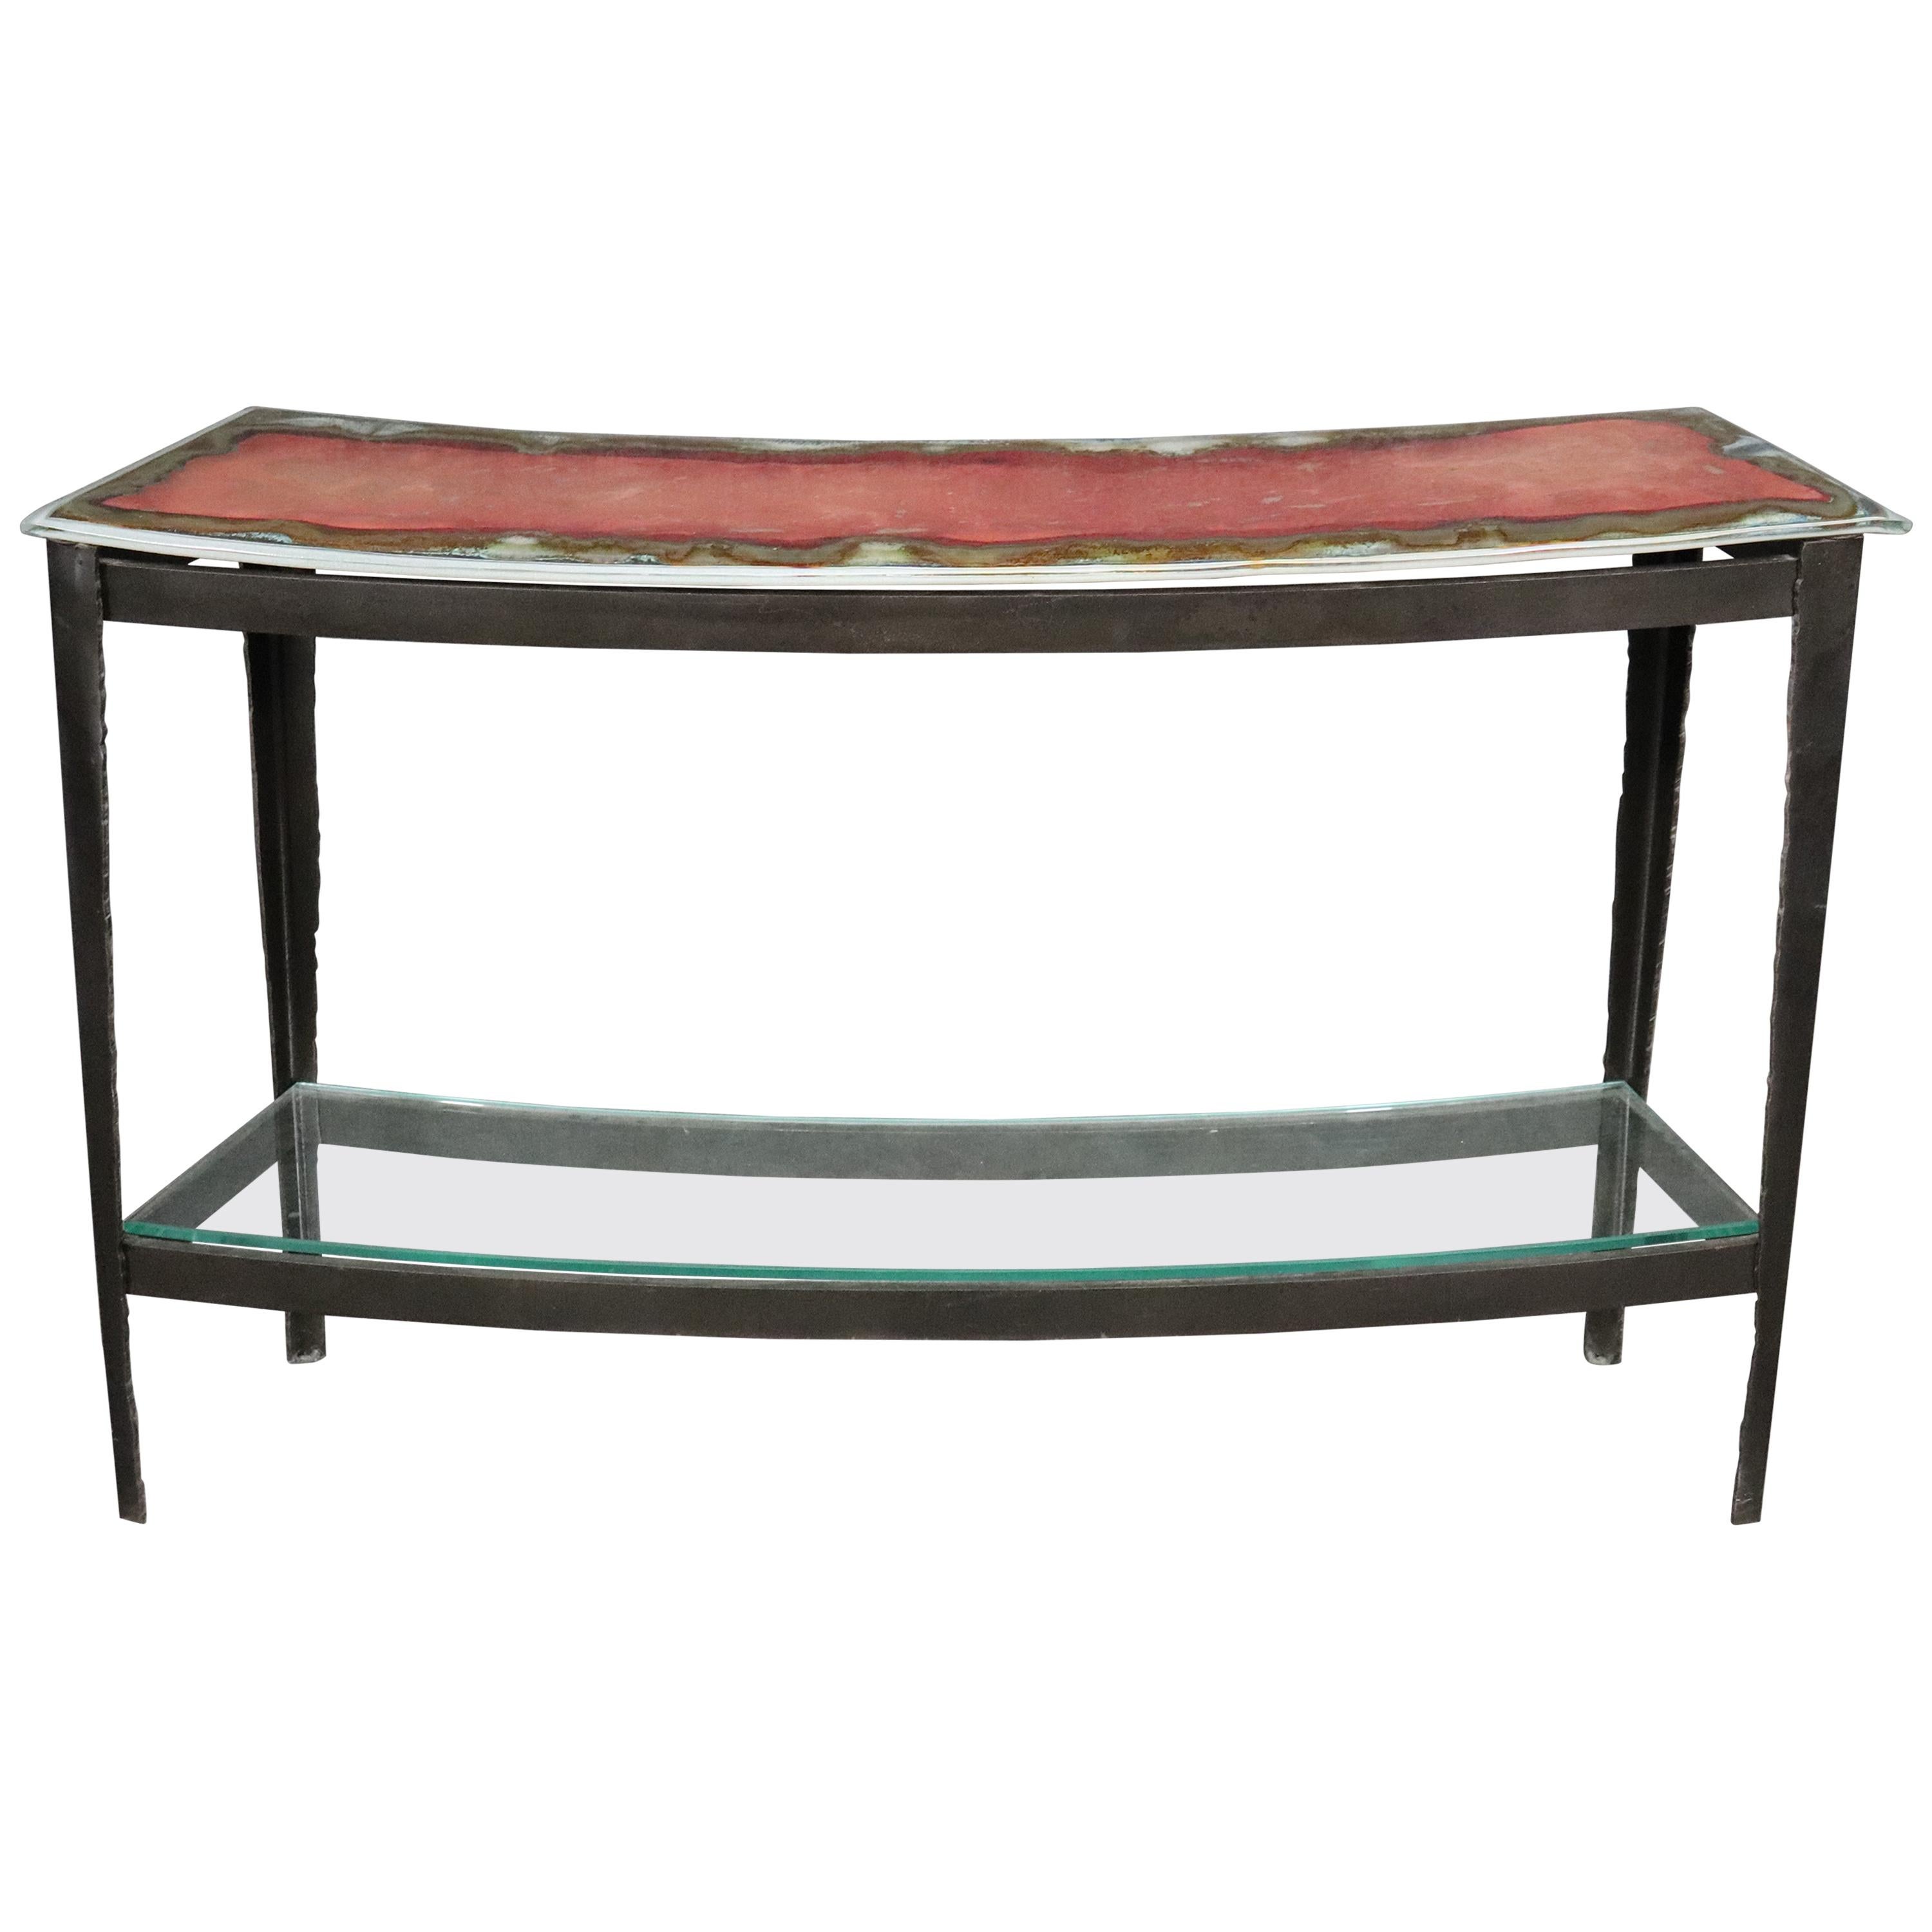 Unique Art Studio Made Melted Stained Glass Curved Console Table Steel Base